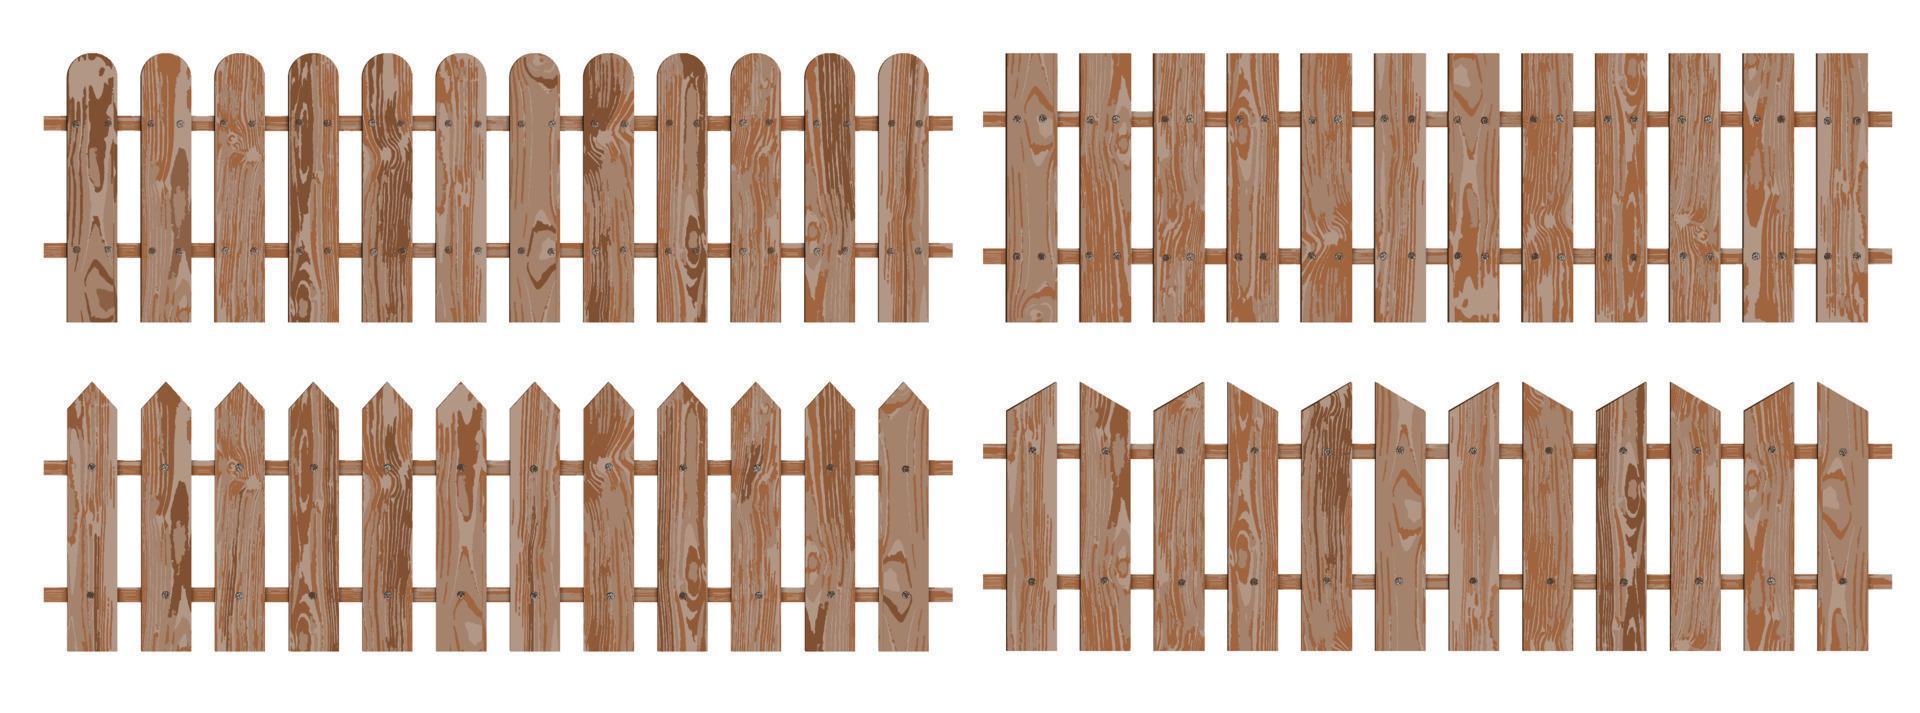 set of wooden fence vector